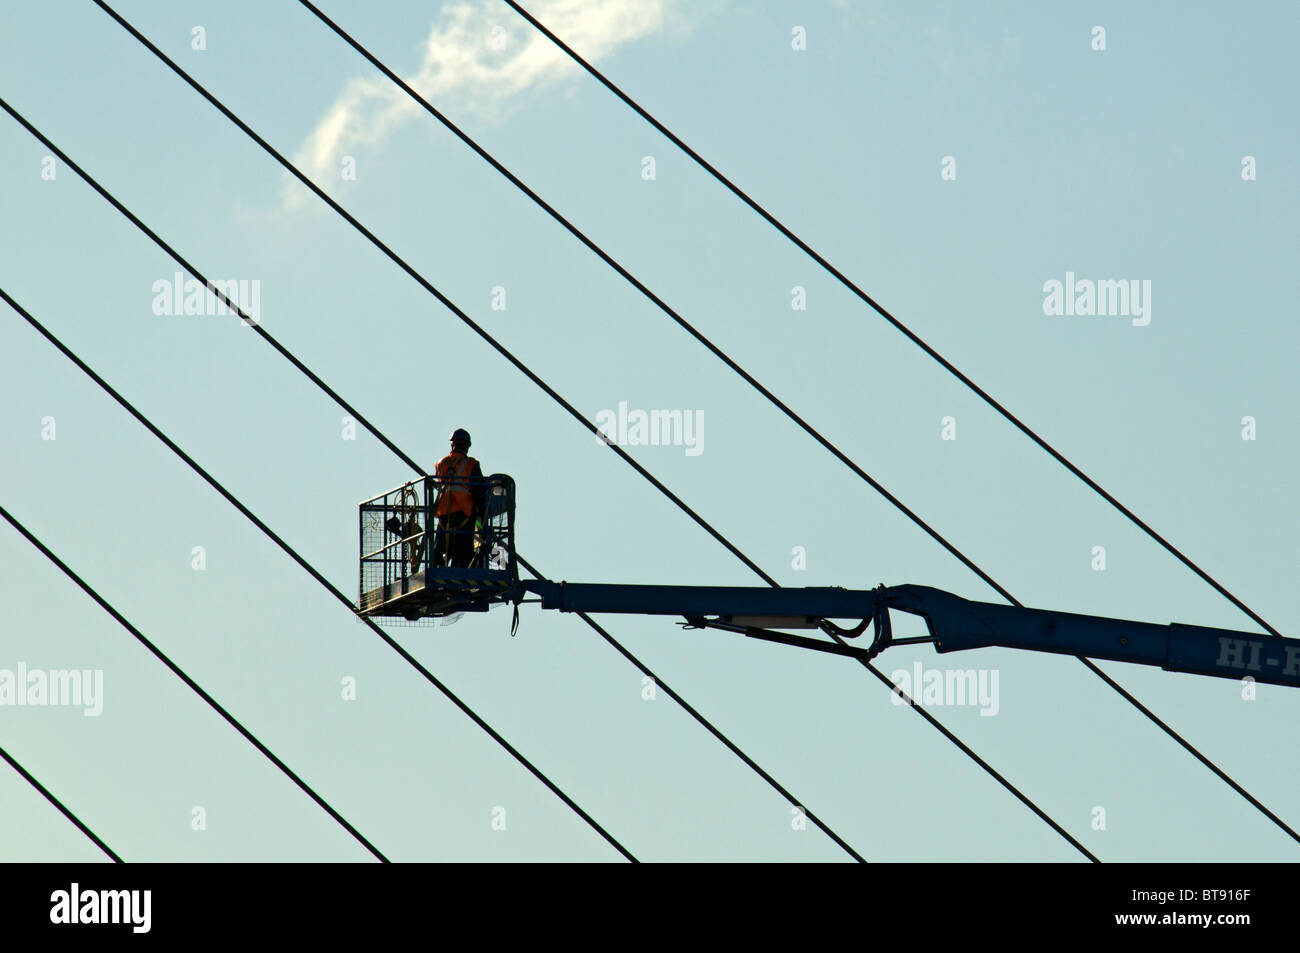 High reach access platform (cherry picker) working on a cable stayed footbridge at Salford Quays, Manchester, England, UK Stock Photo